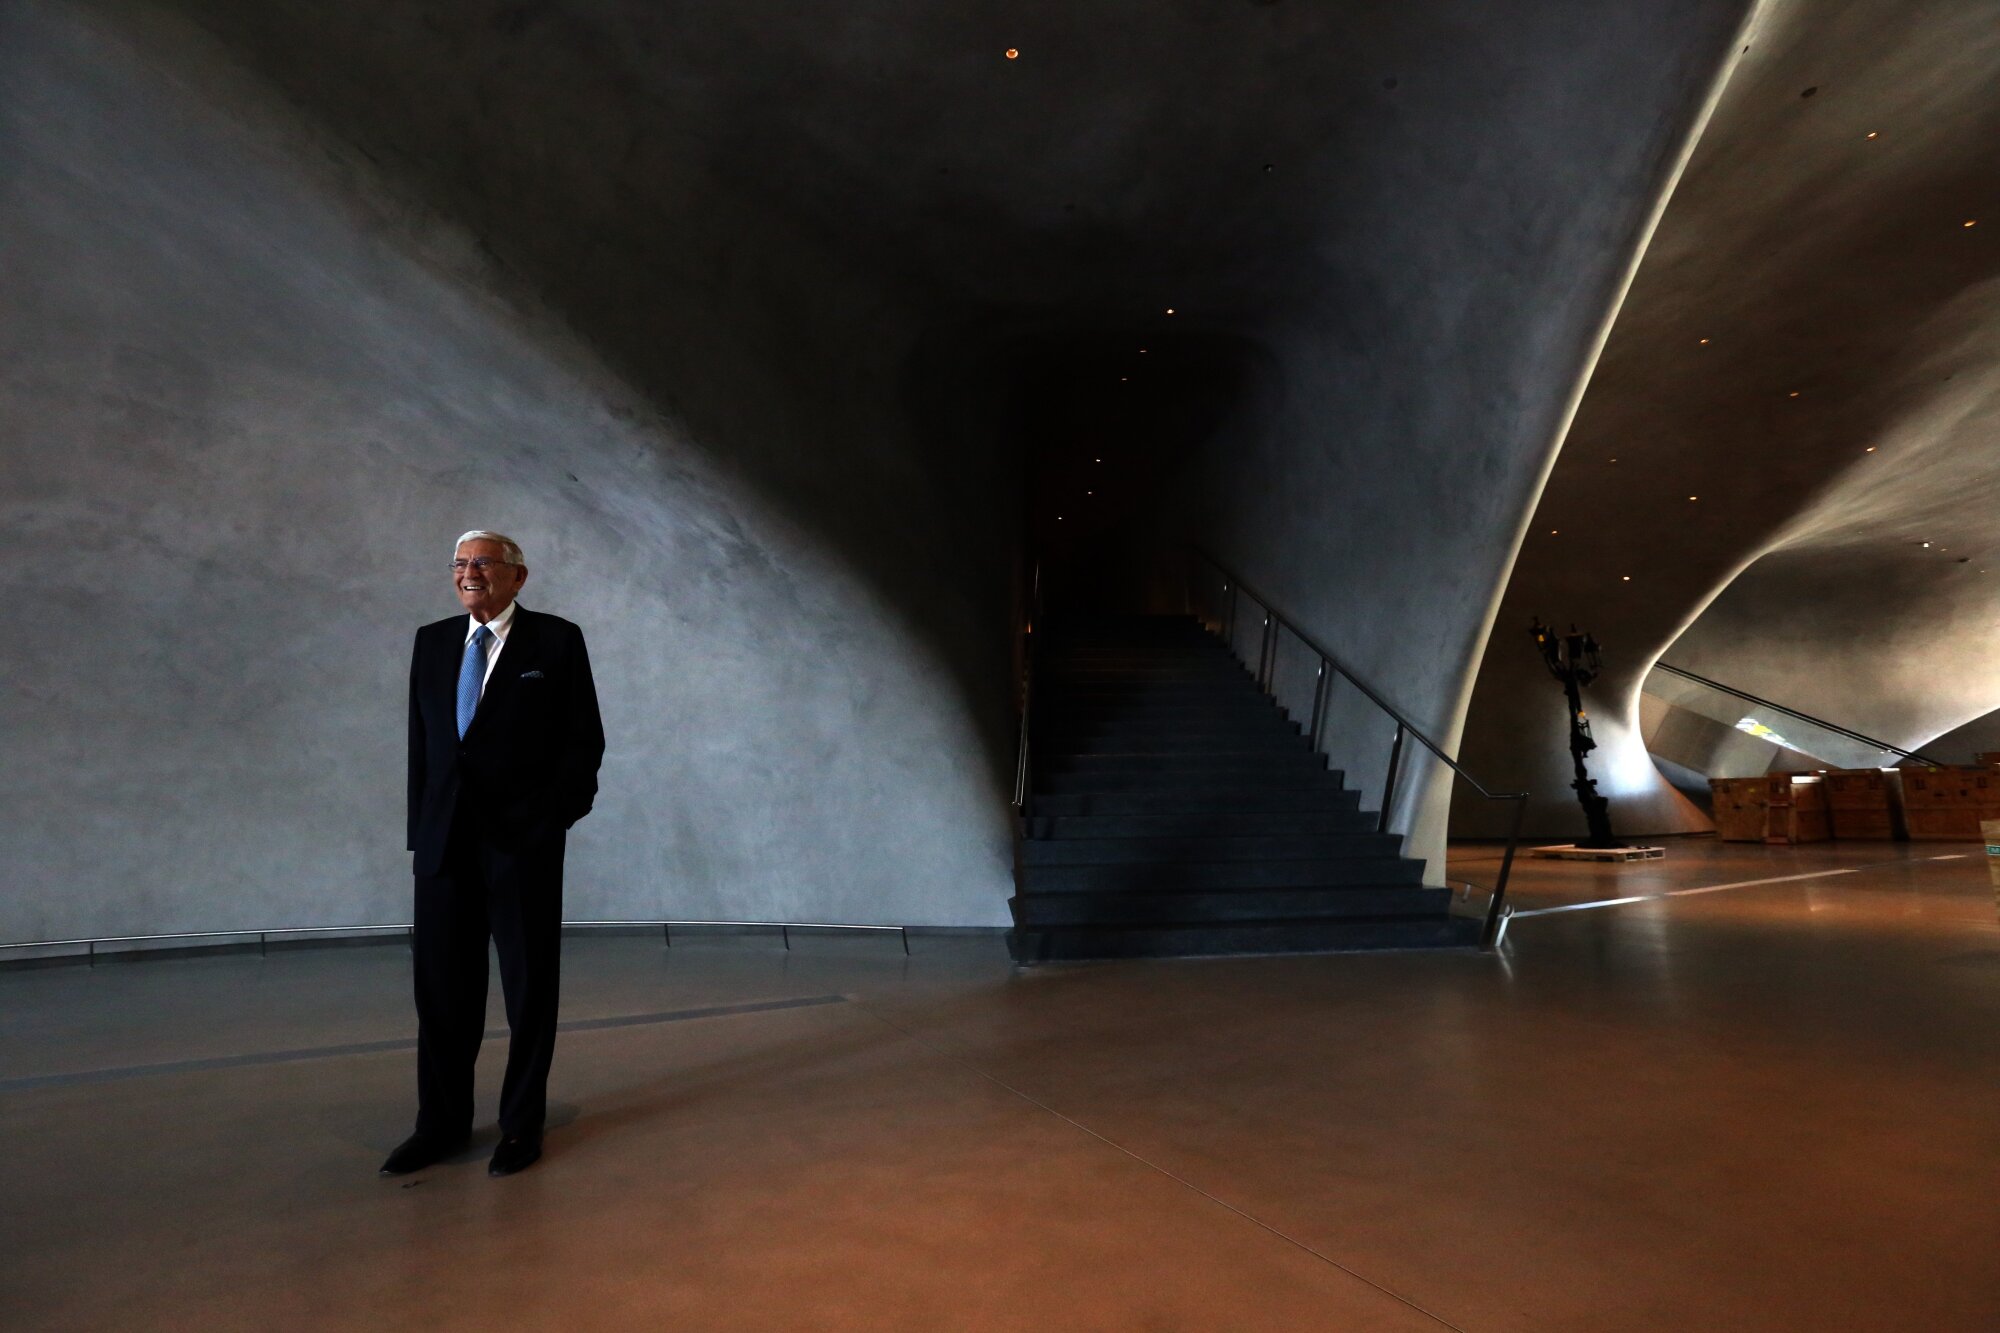 Eli Broad poses for a photo in a cavernous space with curved, shaded walls.